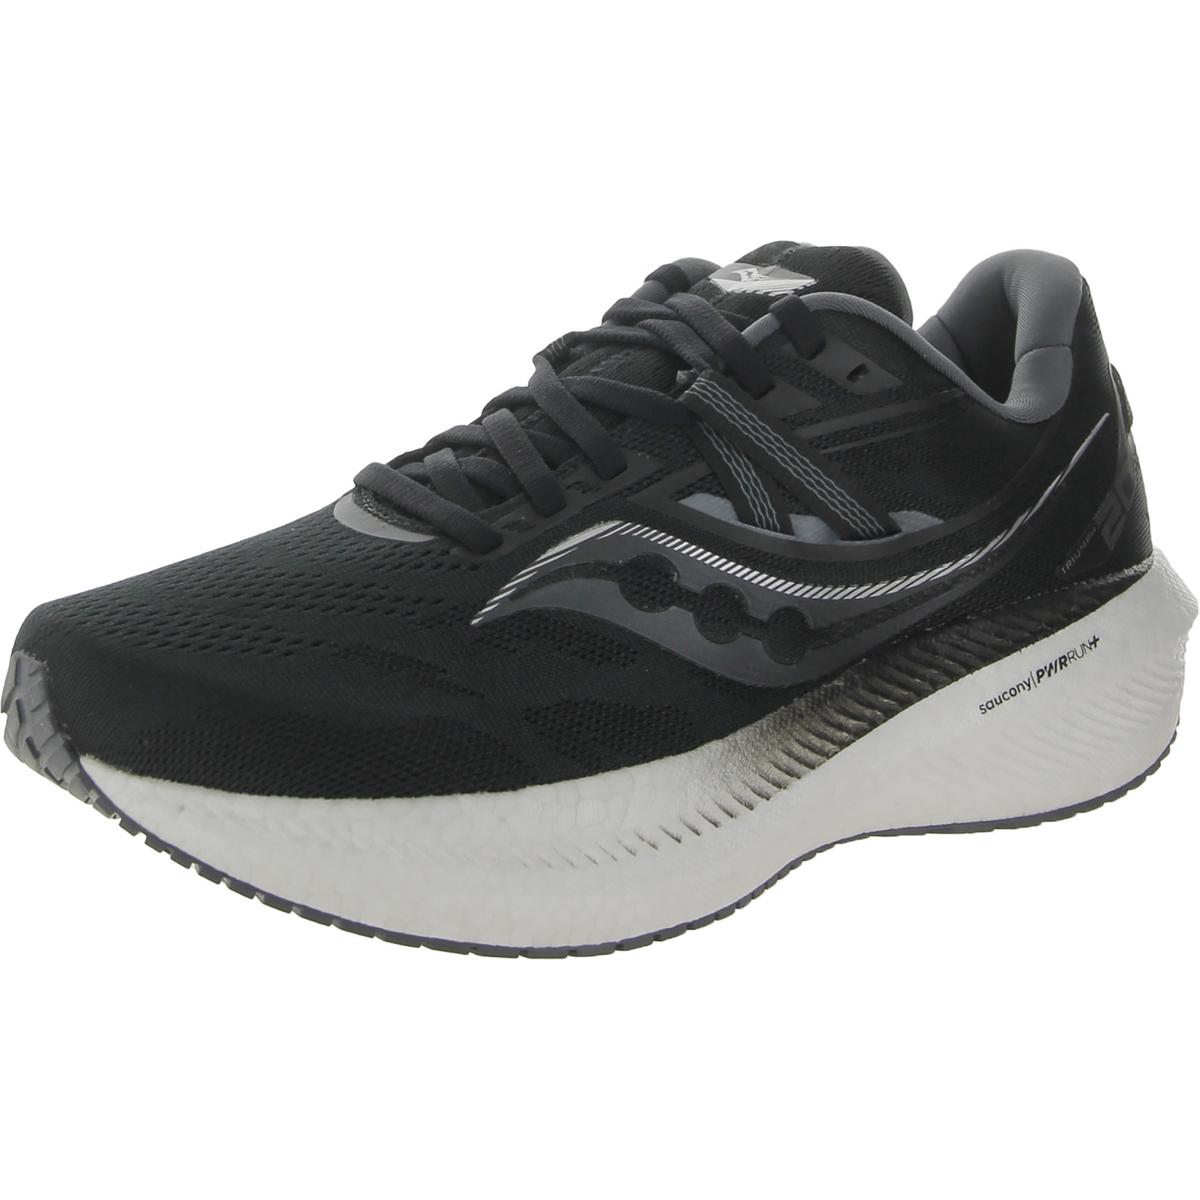 Saucony Triumph 20 Mens Fitness Gym Running Shoes